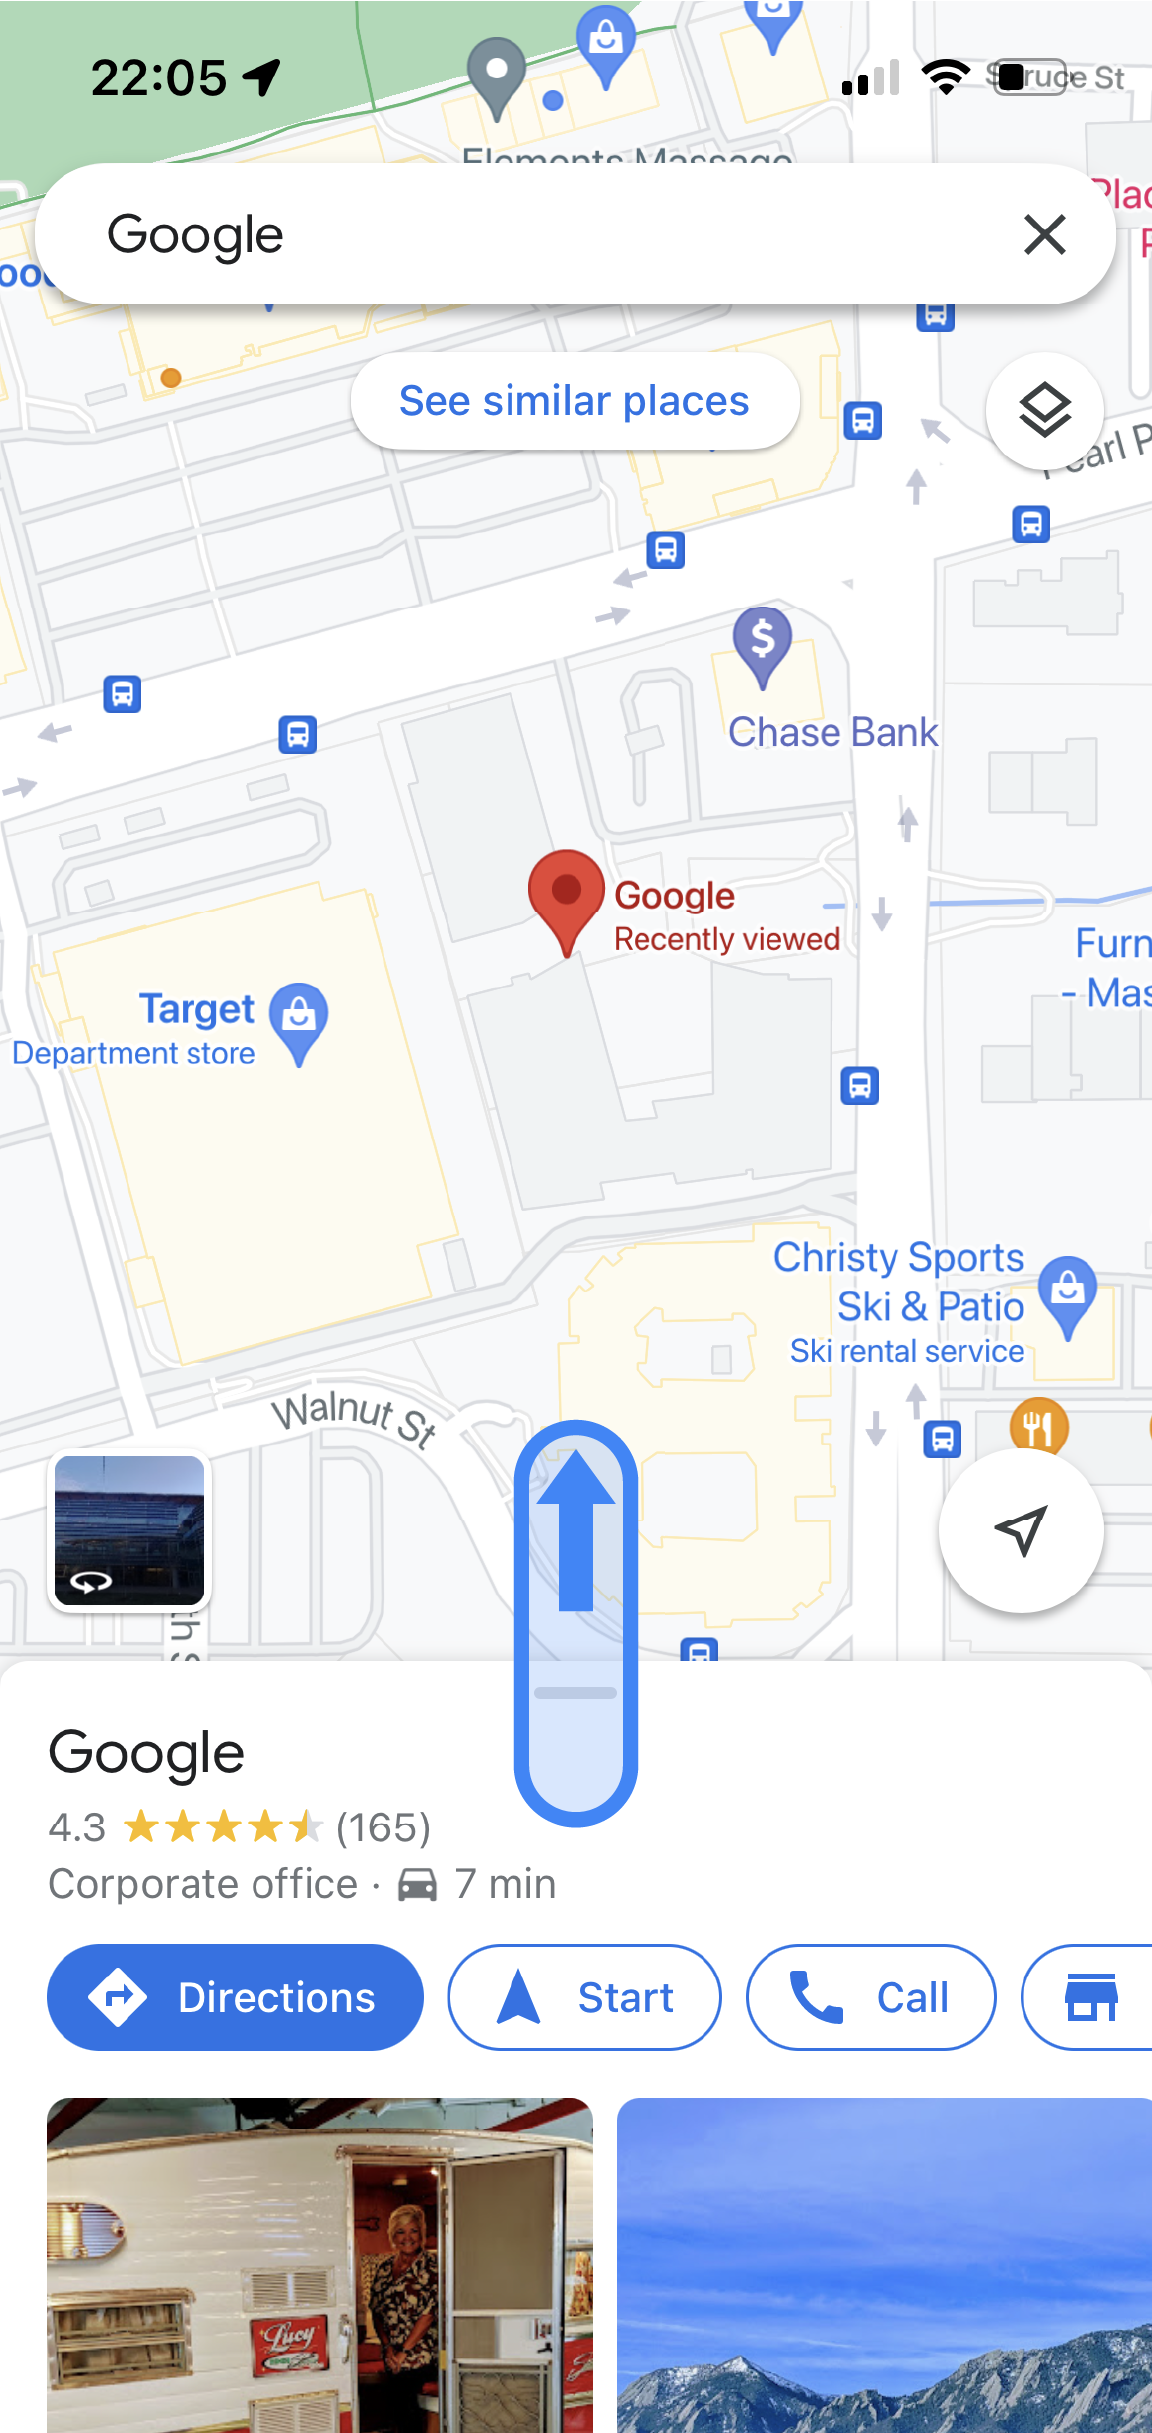 In Google Maps app, a Google office location is displayed. At the bottom of the app, the location name and average ratings are shown with buttons to find directions, start navigation, call, and more.